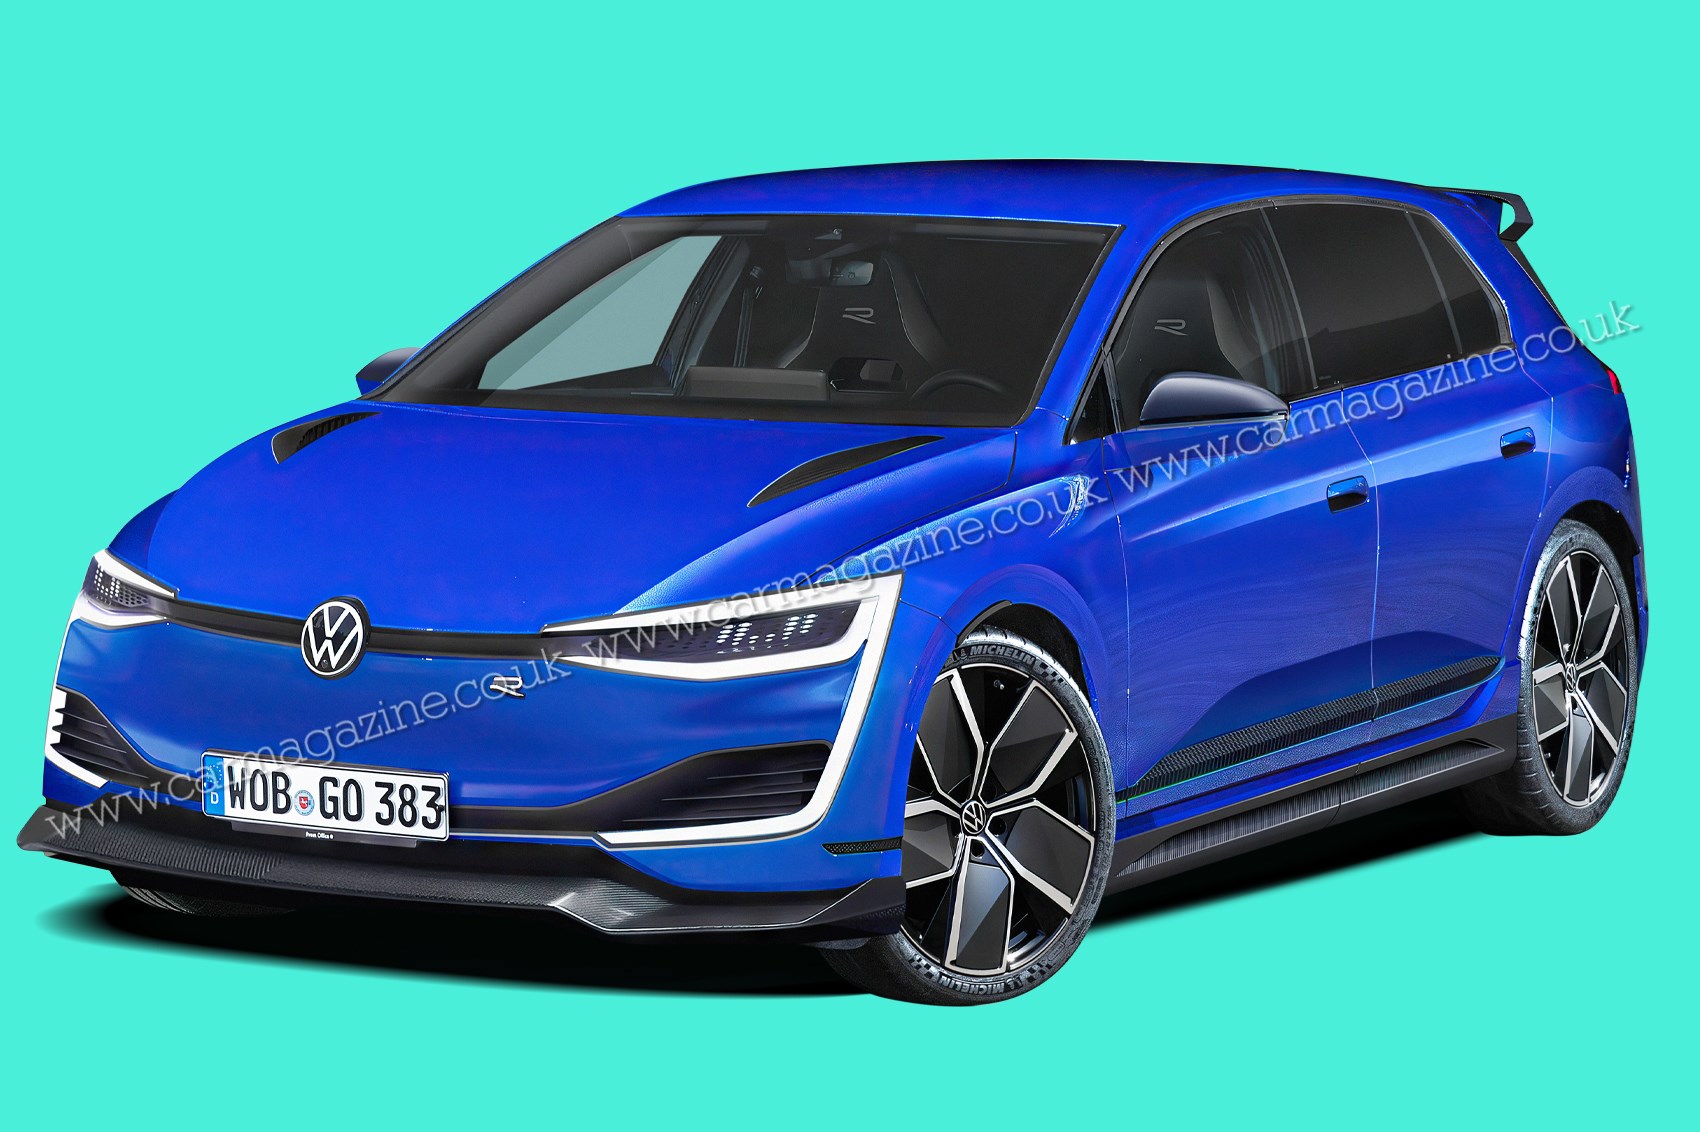 CAR's dossier on the Mk9 VW Golf: smarter, simpler, electric and